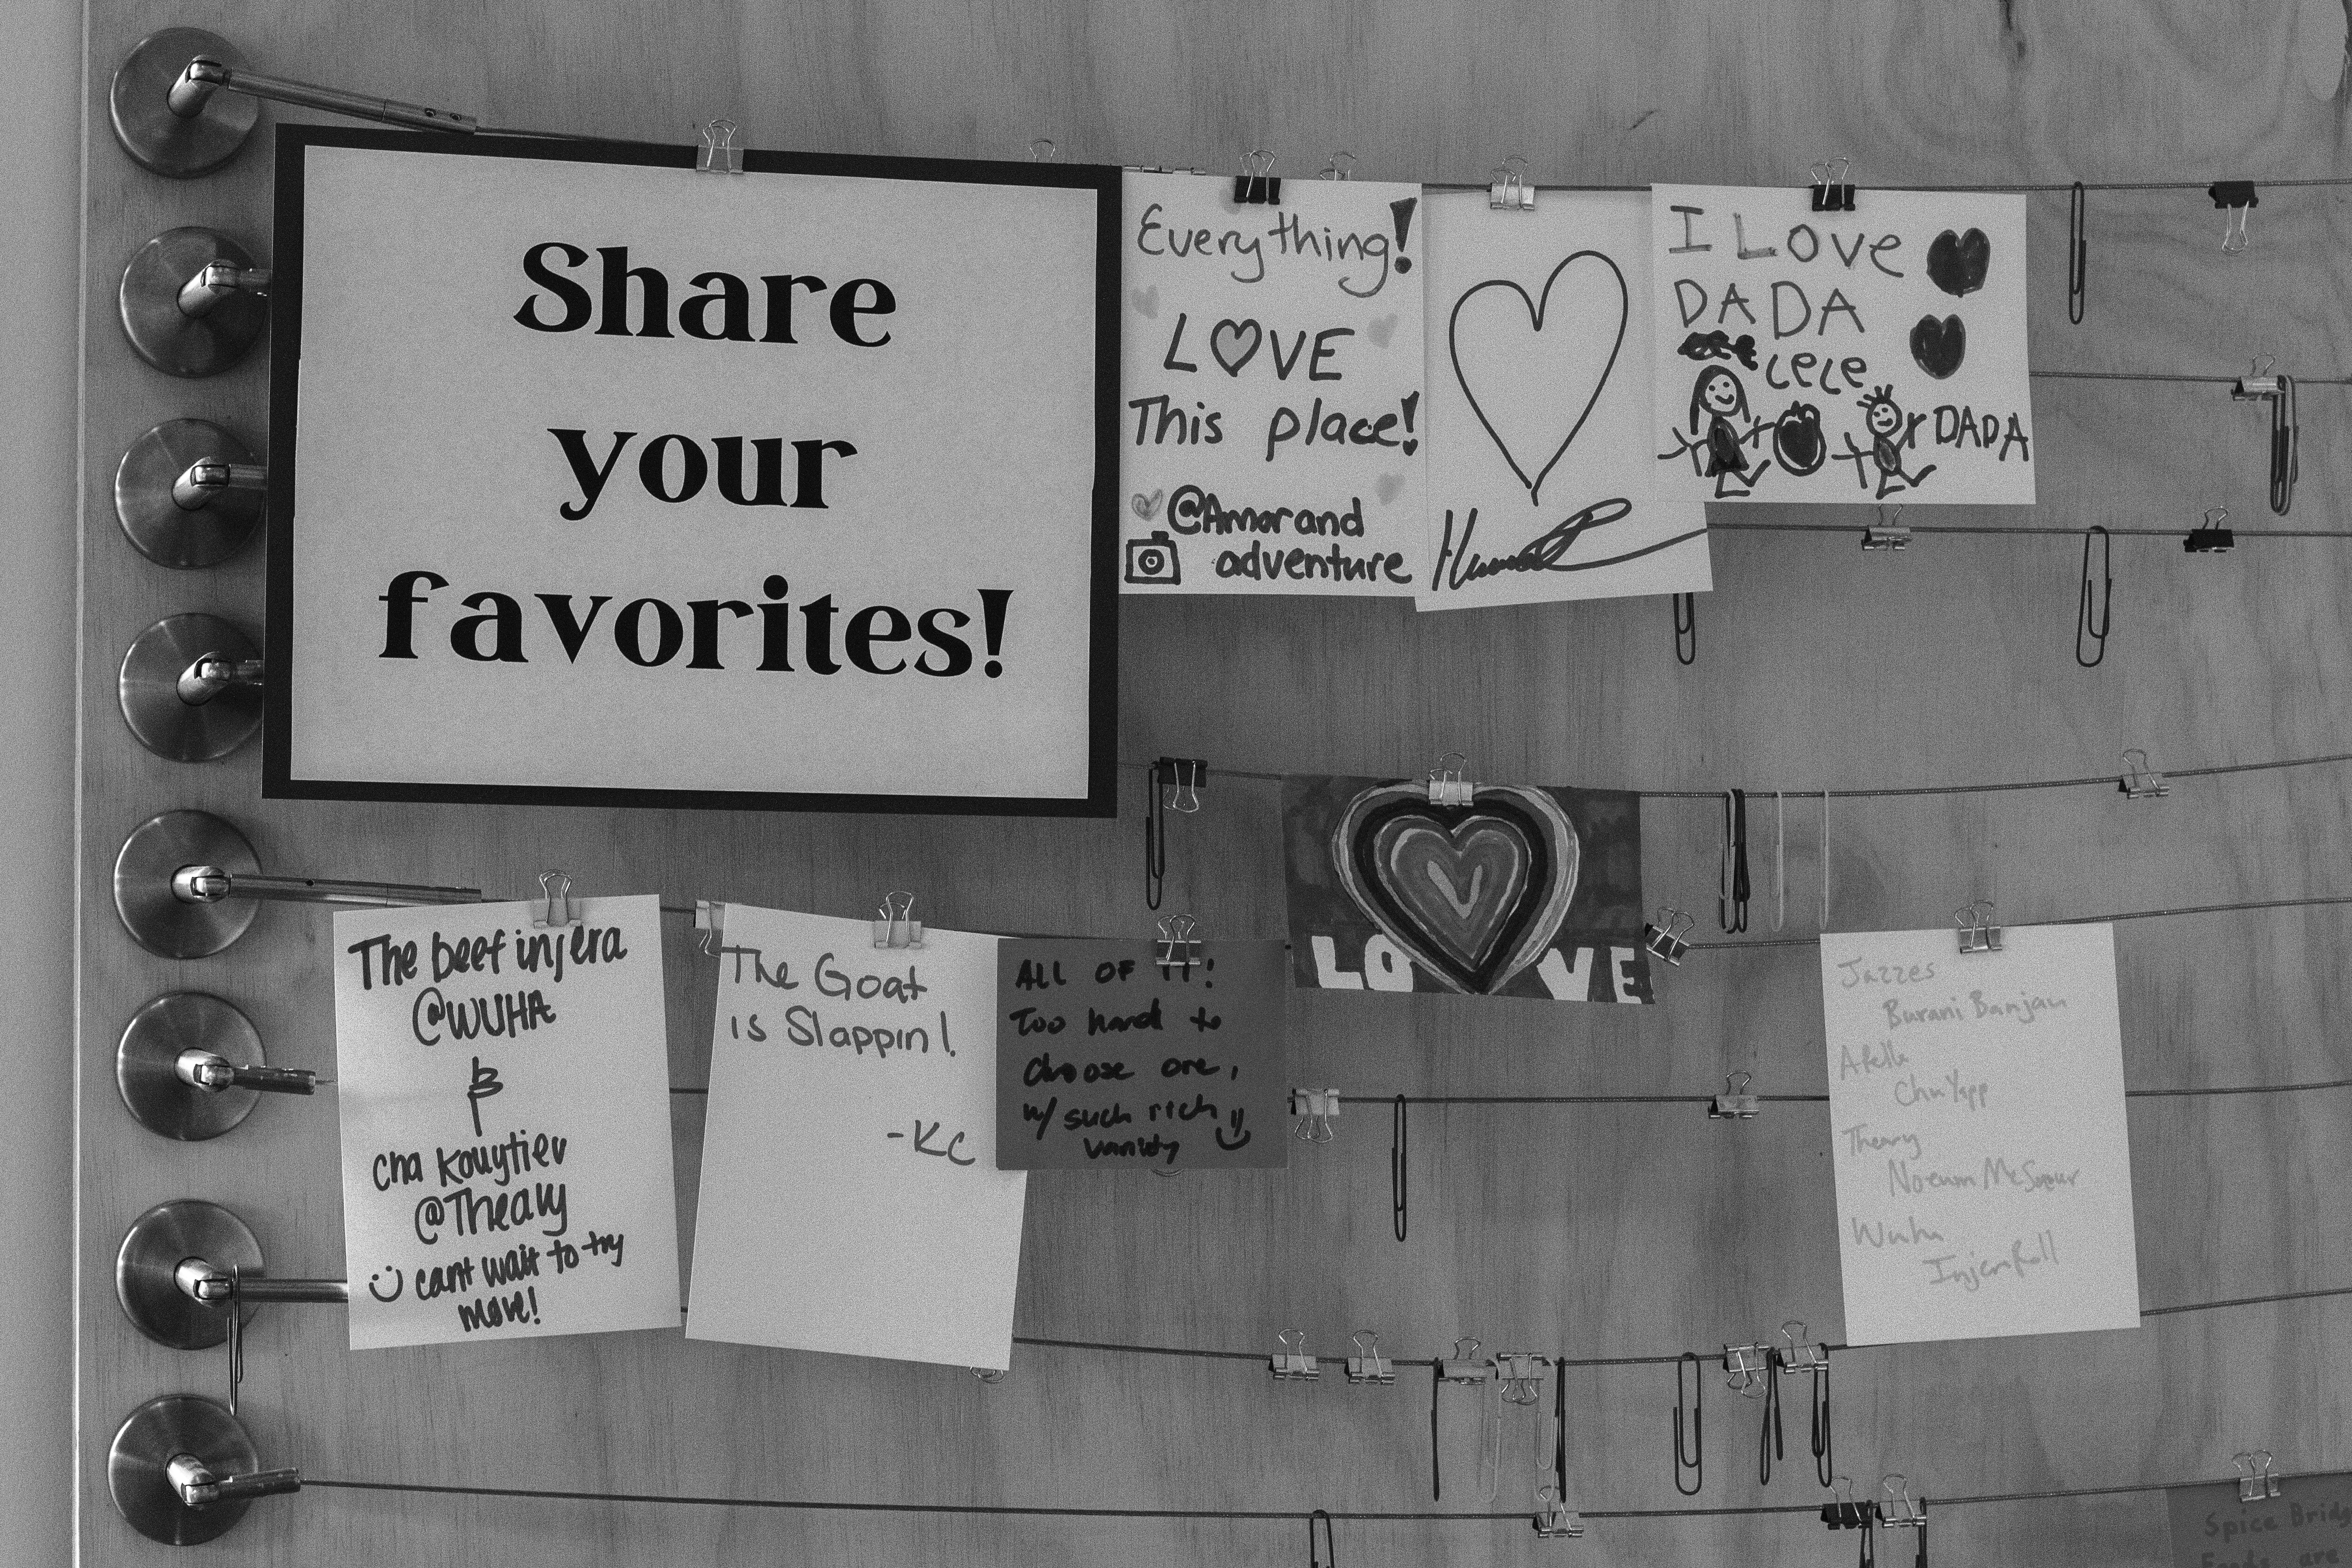 Notes of appreciation for a Cambodian business hanging on wall with a sign that reads "Share your favorites!"